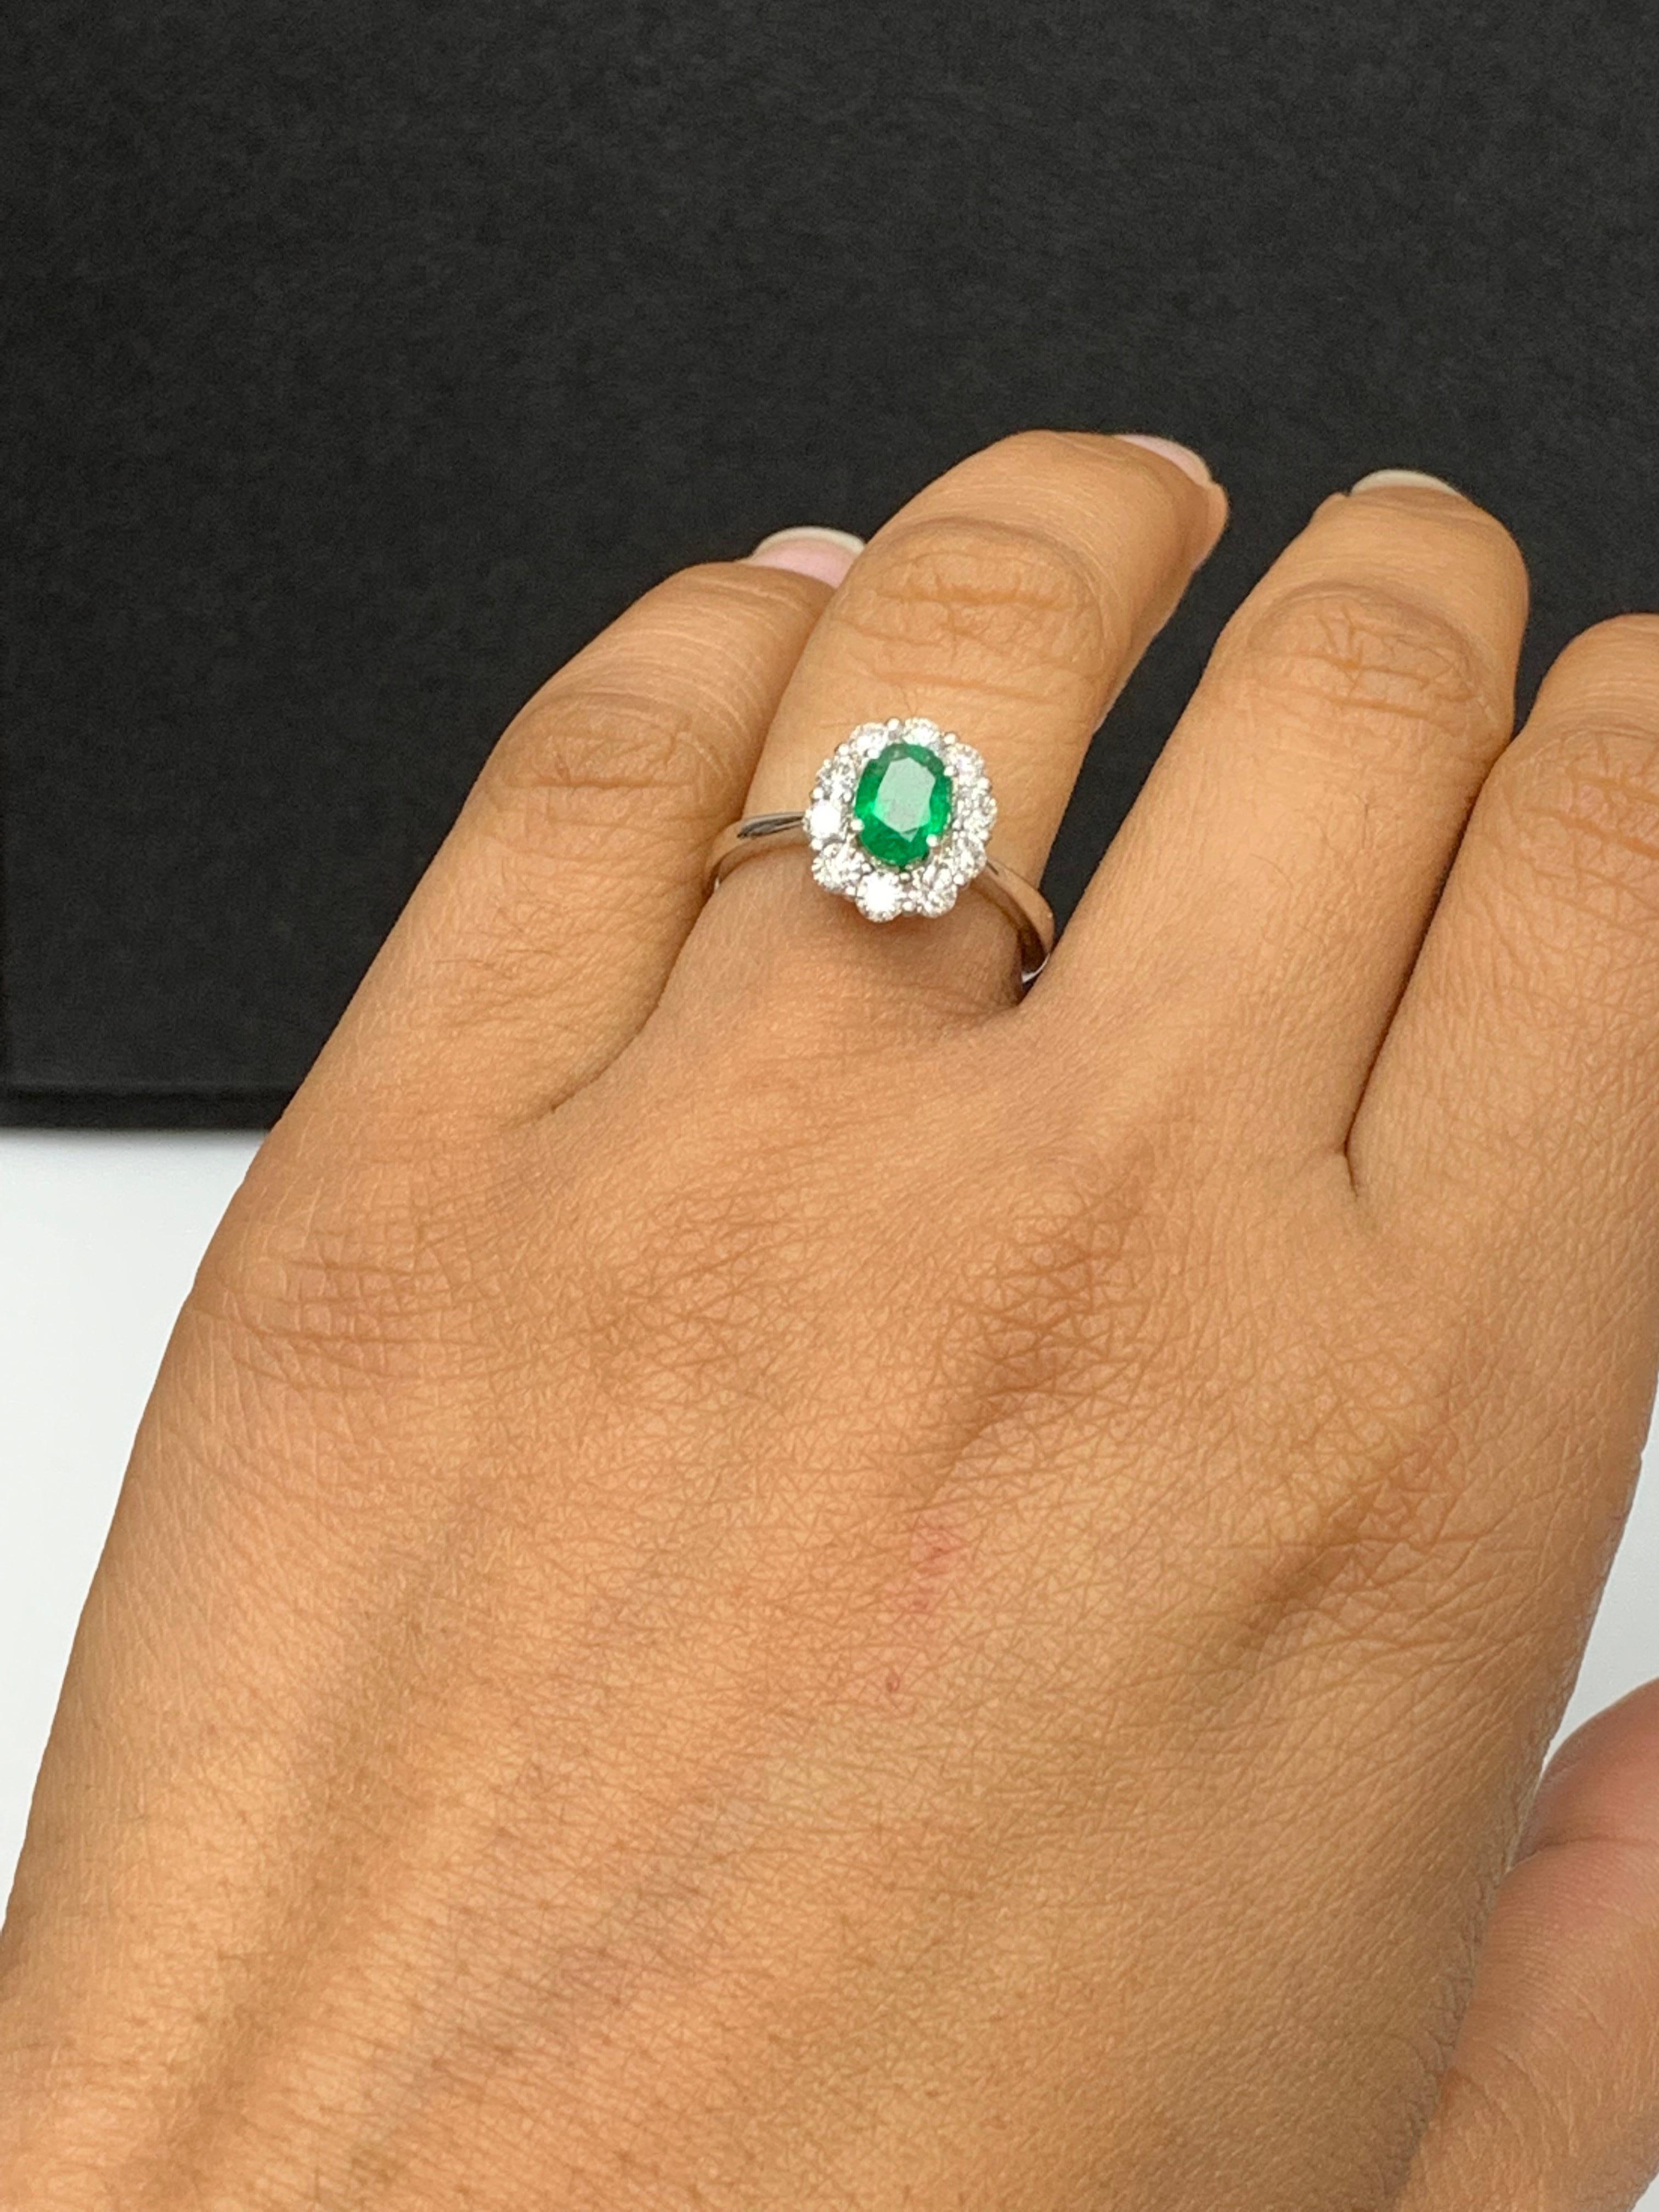 0.68 Carat Oval Cut Emerald and Diamond Ring in 18k White Gold For Sale 2